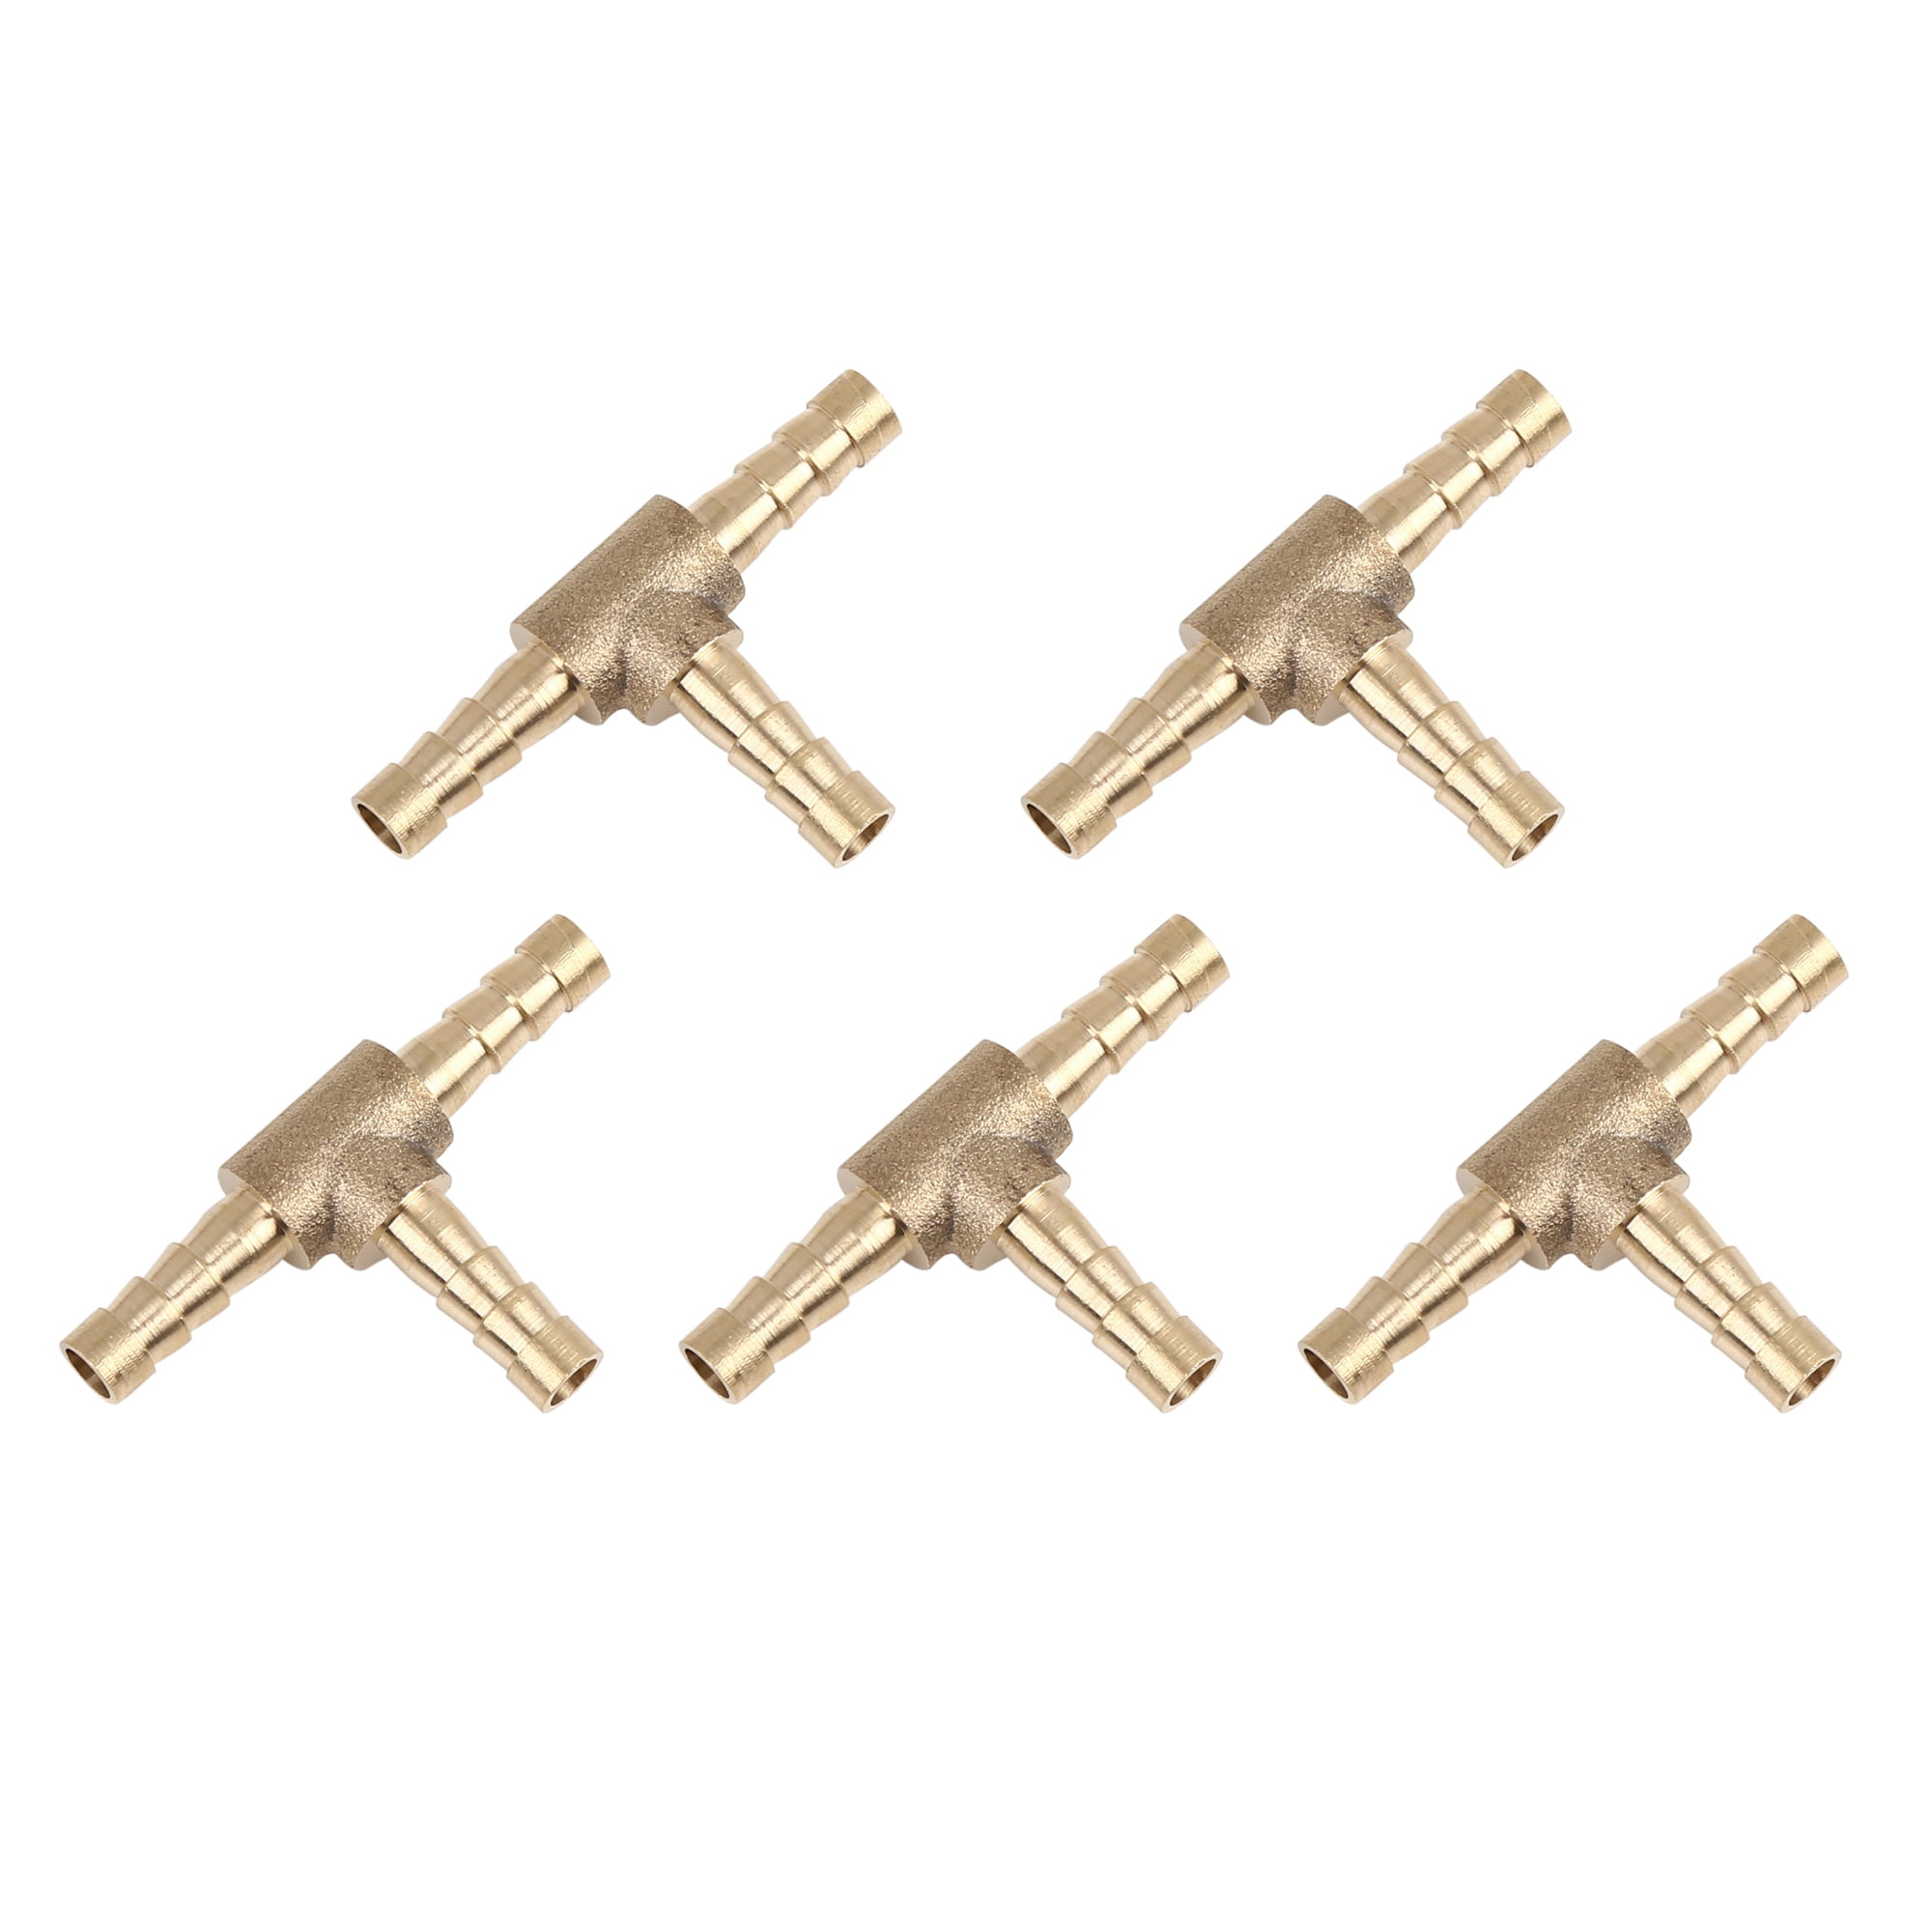 Brass 3 Way Air Gas Hose Barb Connector for 8mm Inner Dia Pipe O4H5 